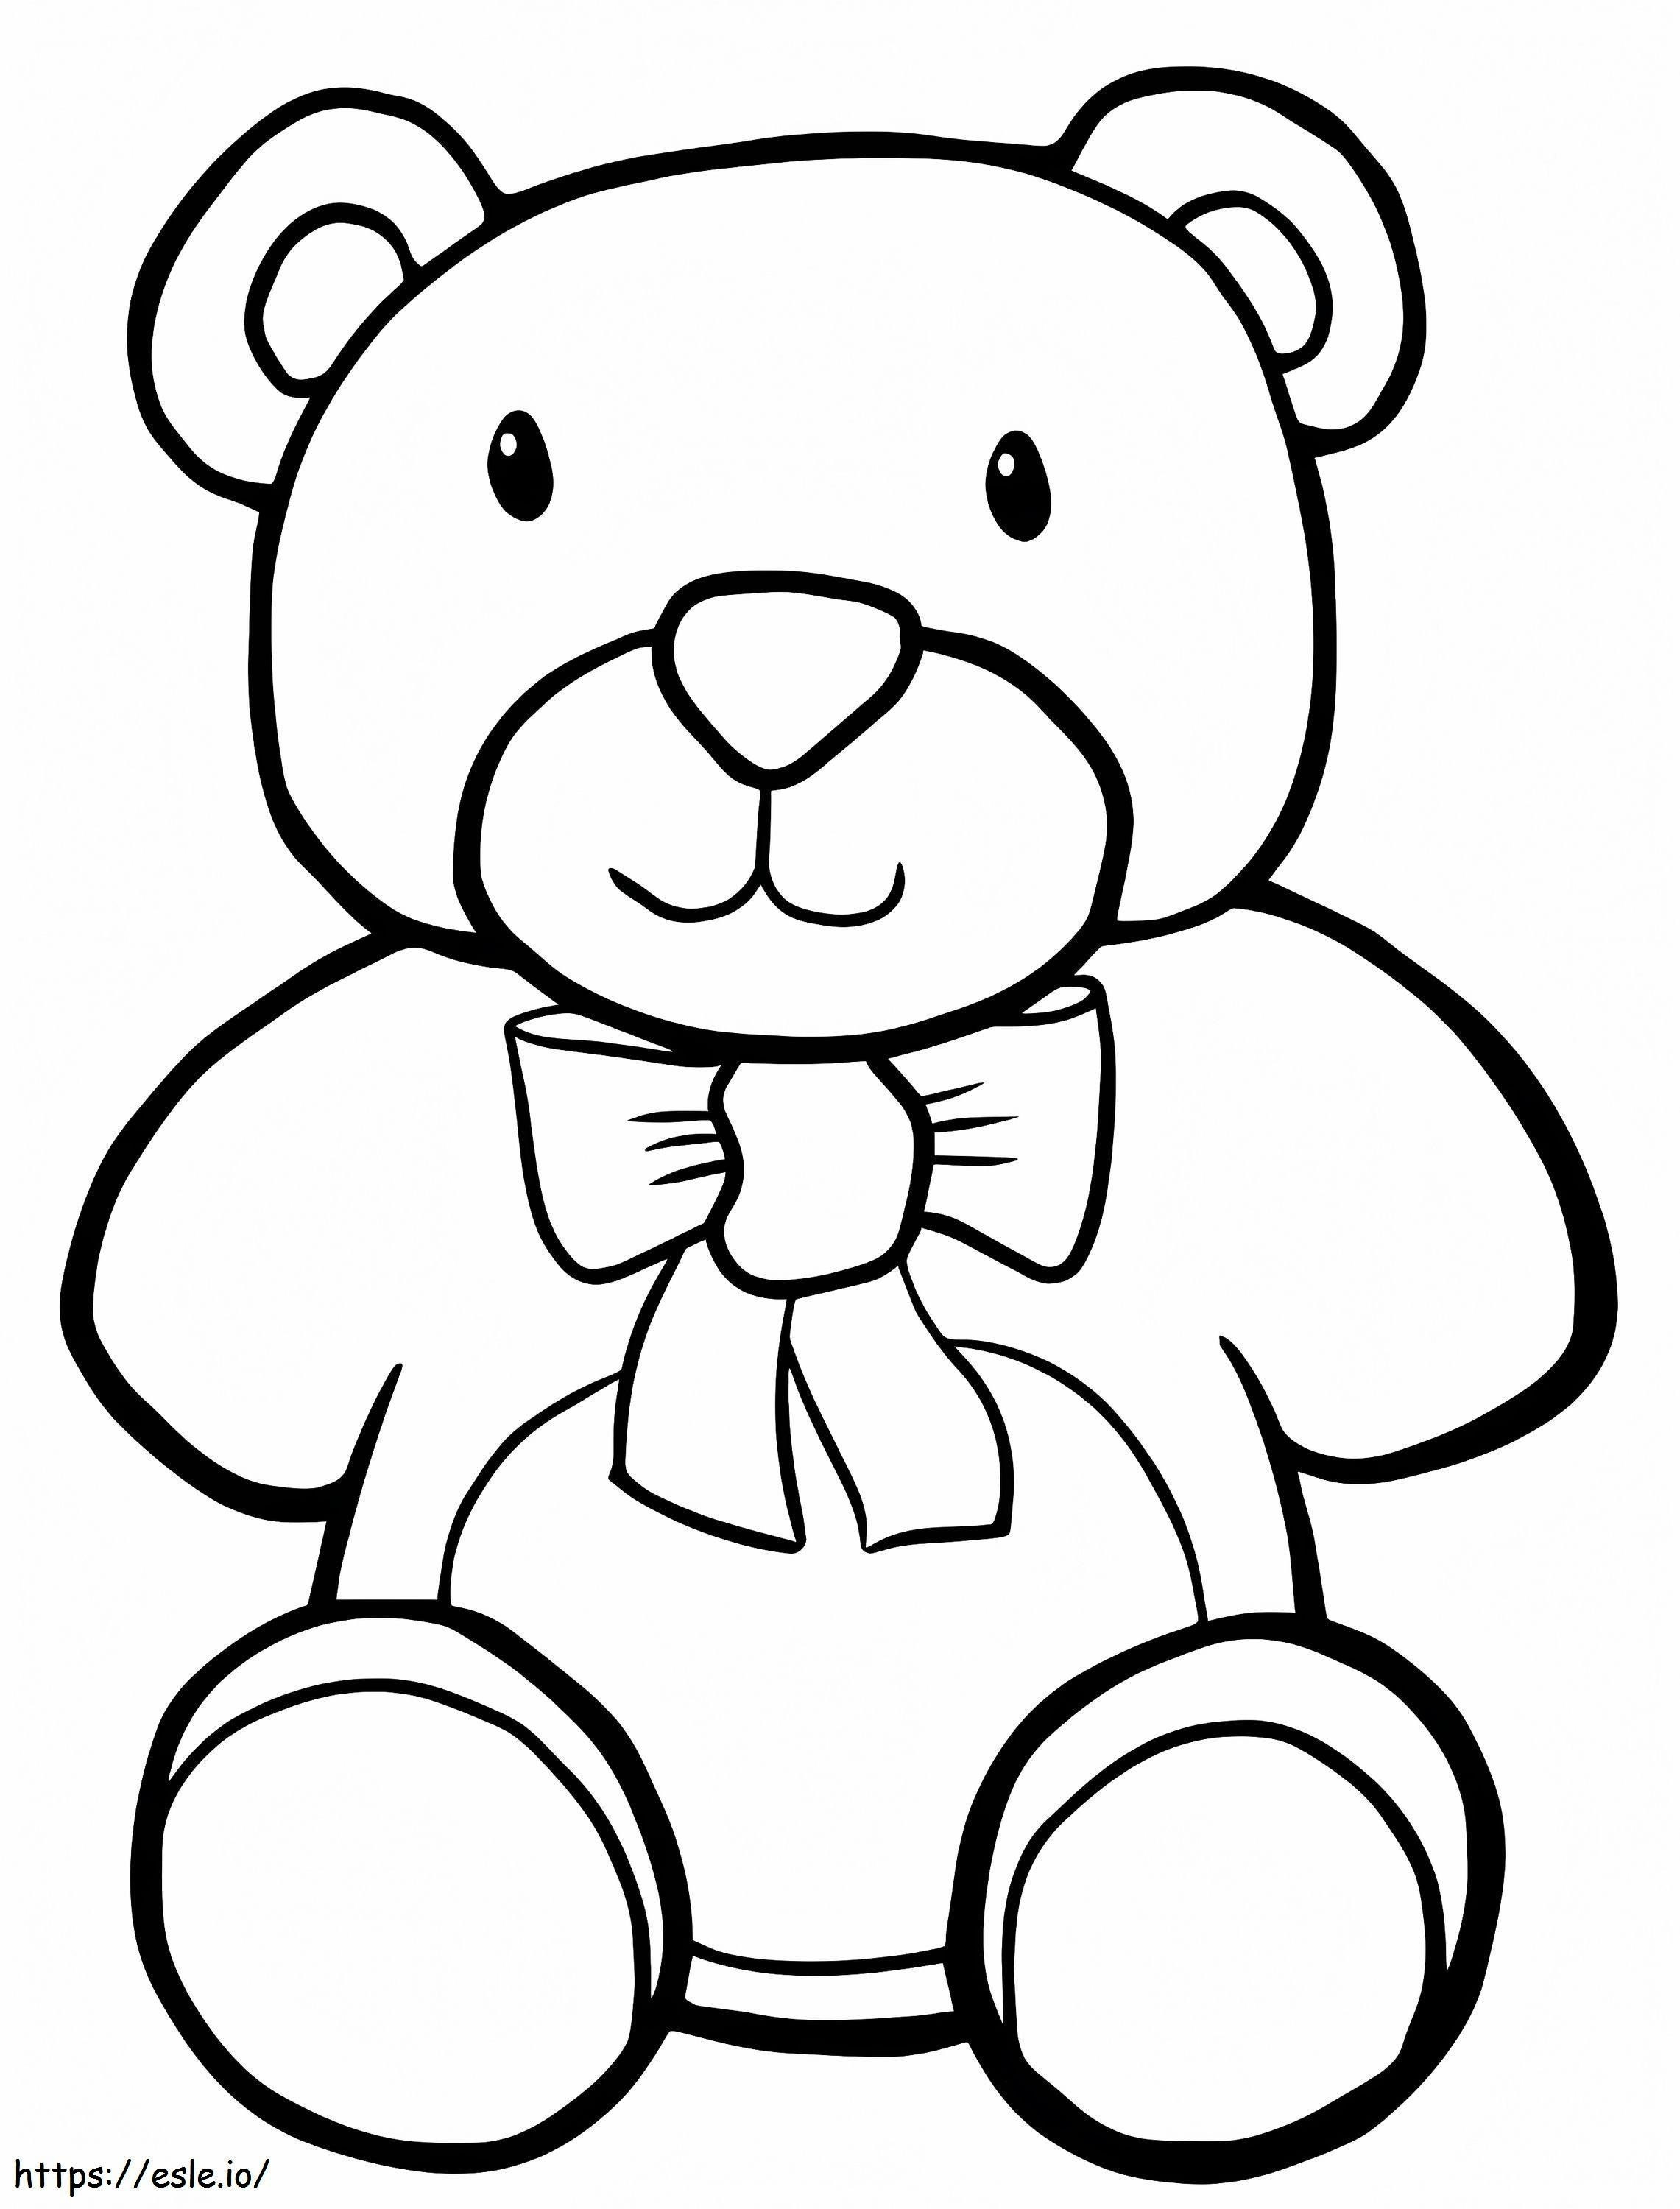 Teddy Bear With Bow Tie coloring page